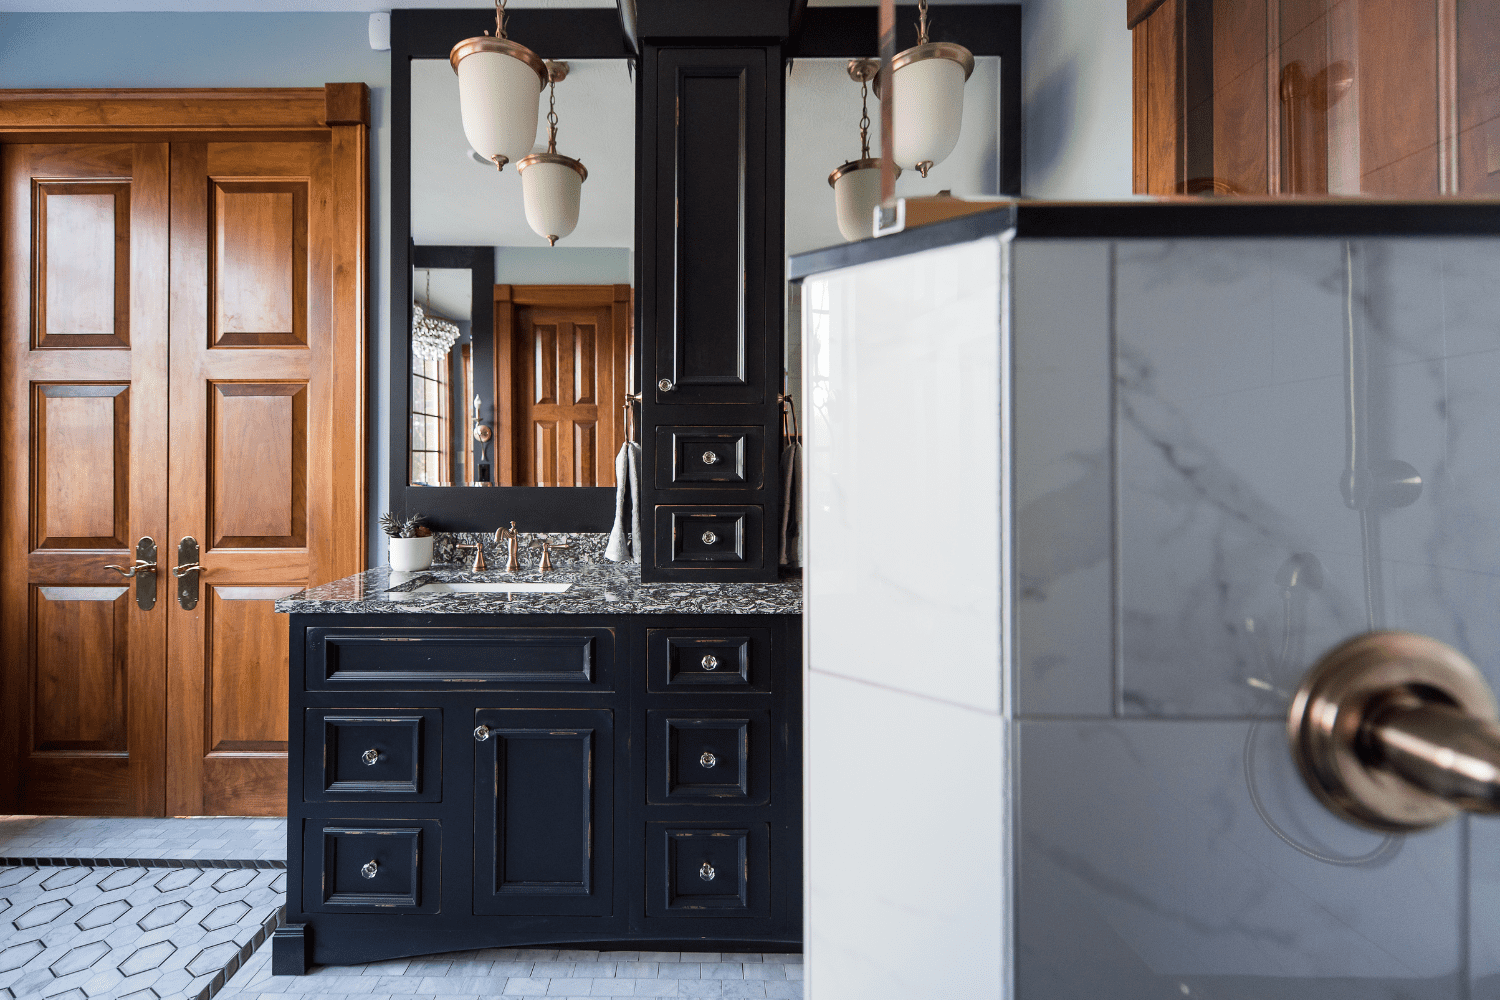 Nicholas Design Build | A bathroom with black cabinets and marble counter tops.